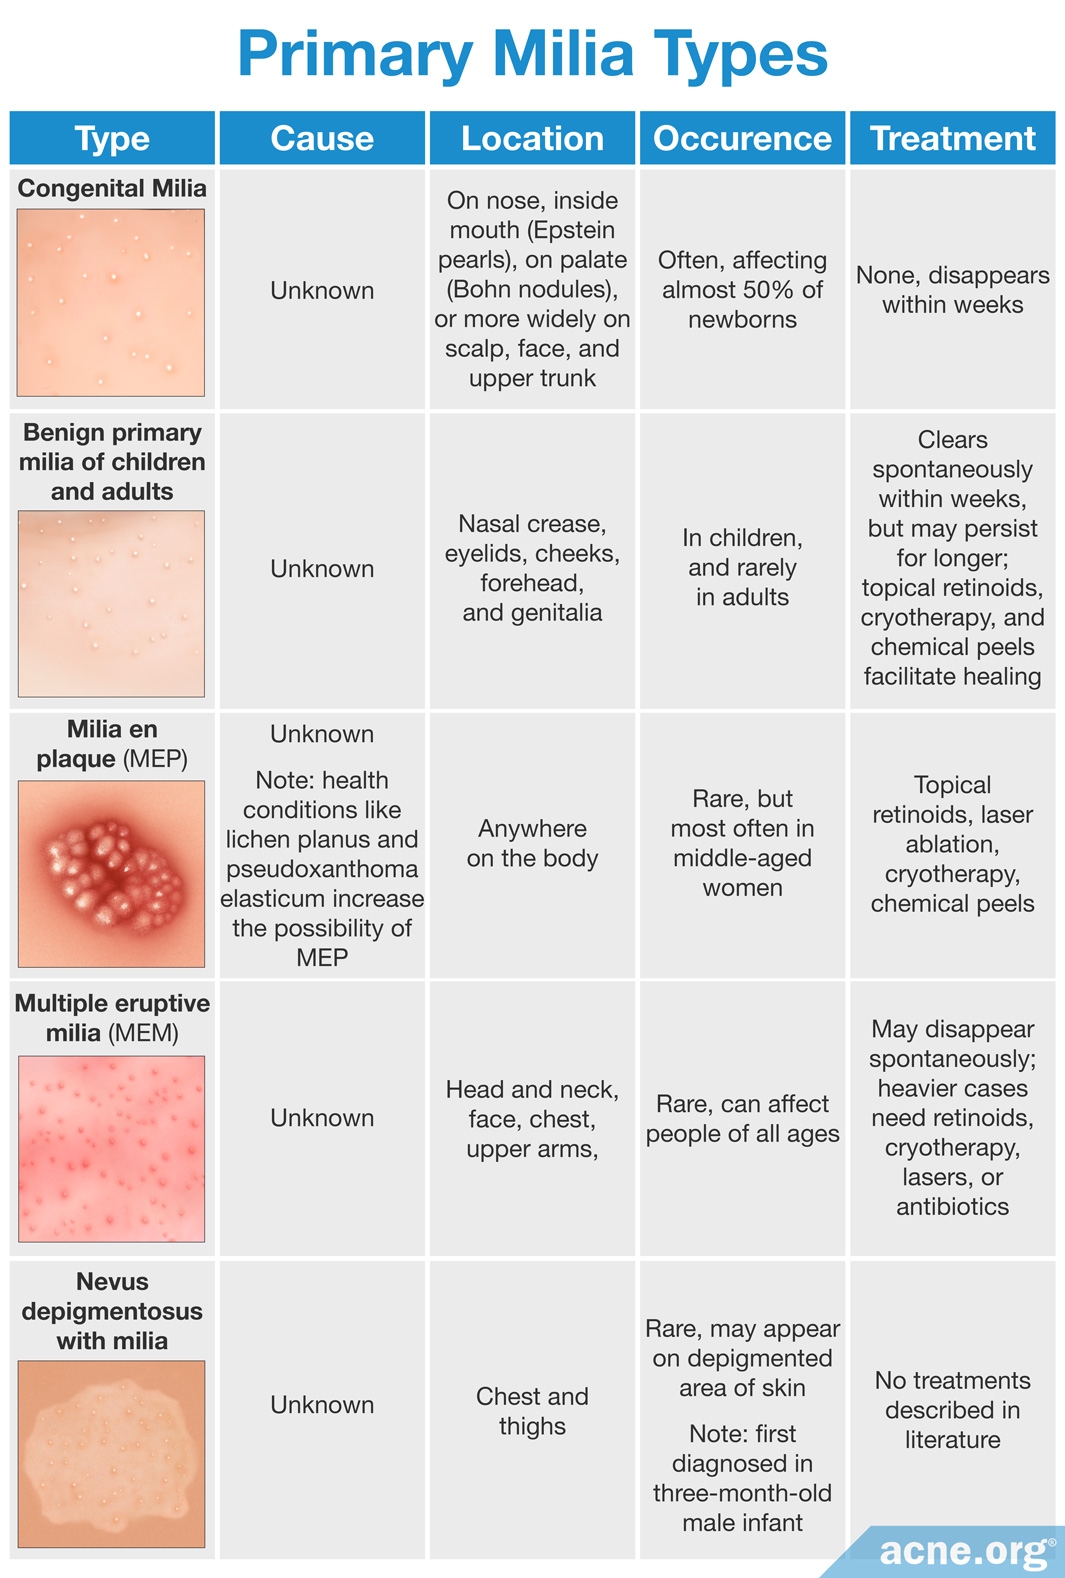 What Are Milia, and Do They Relate to Acne? - Acne.org